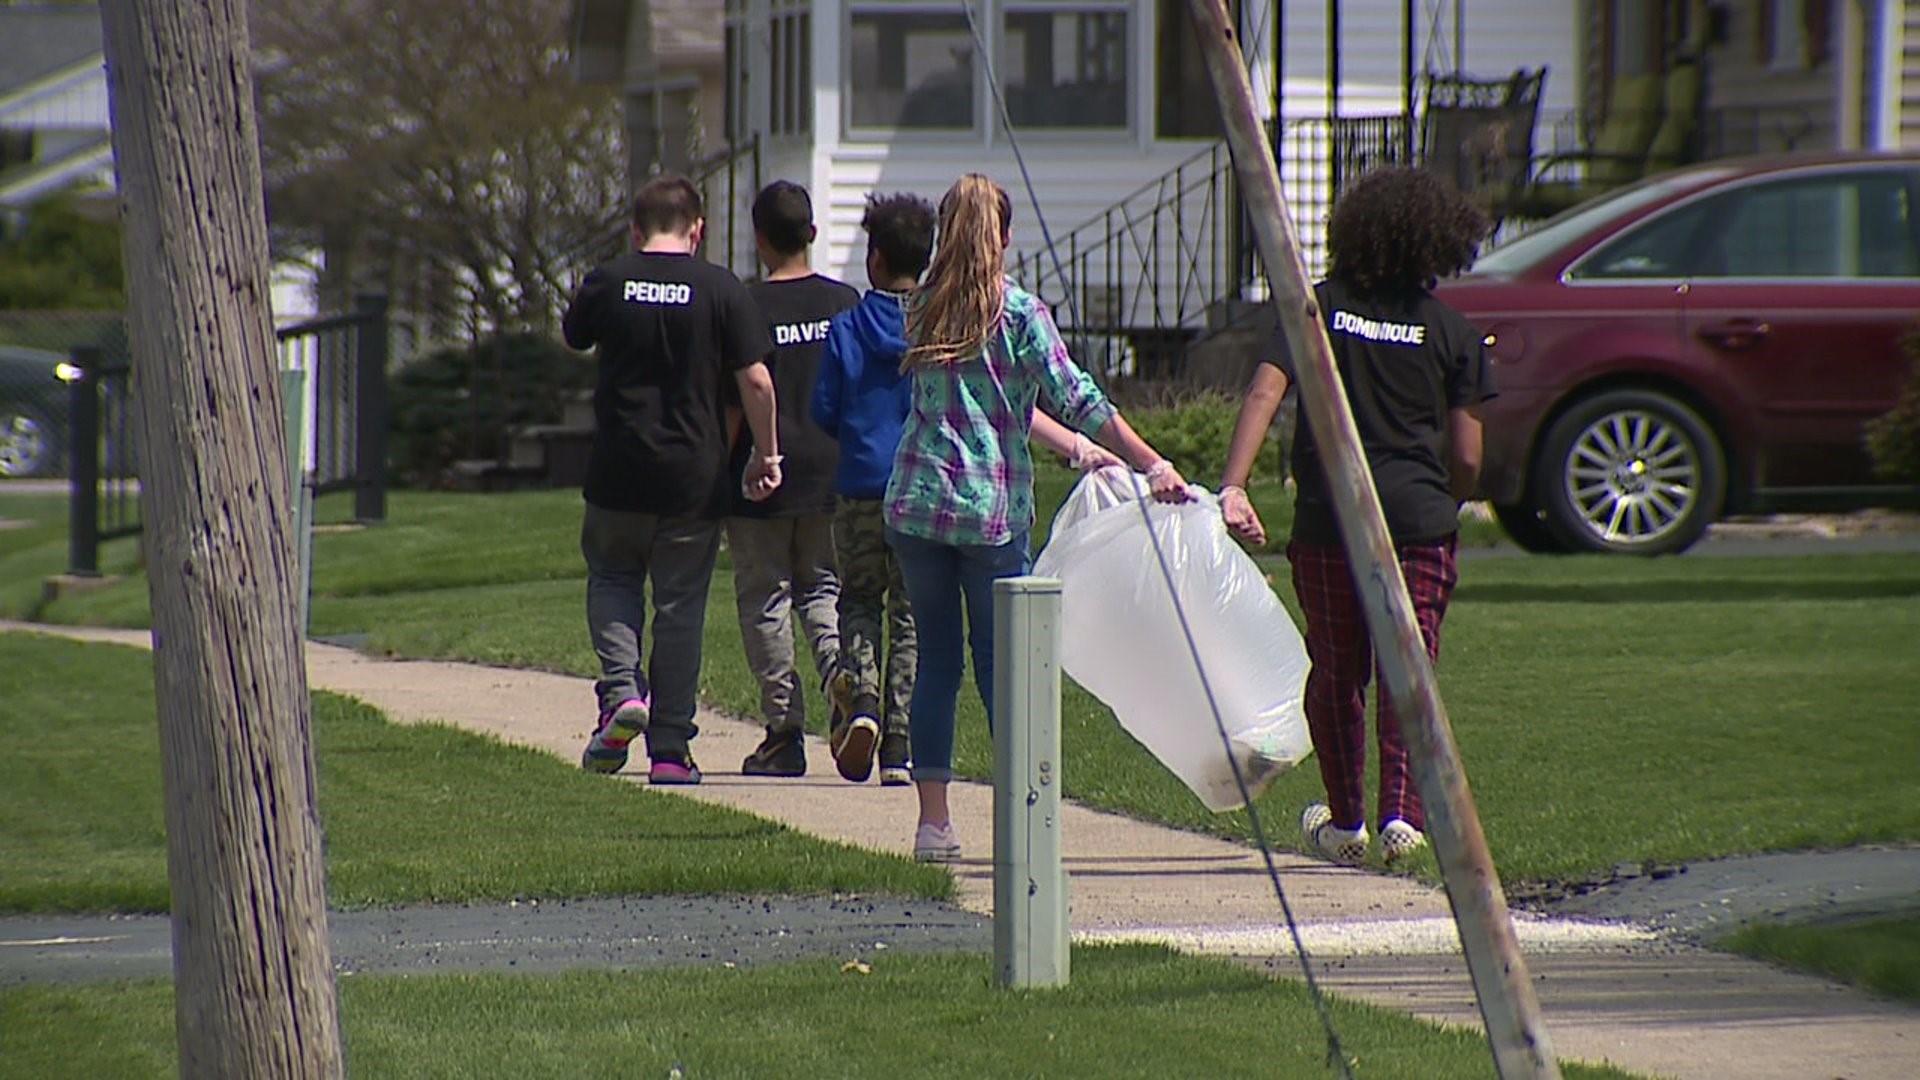 Lombard Junior High picks up trash for earth day